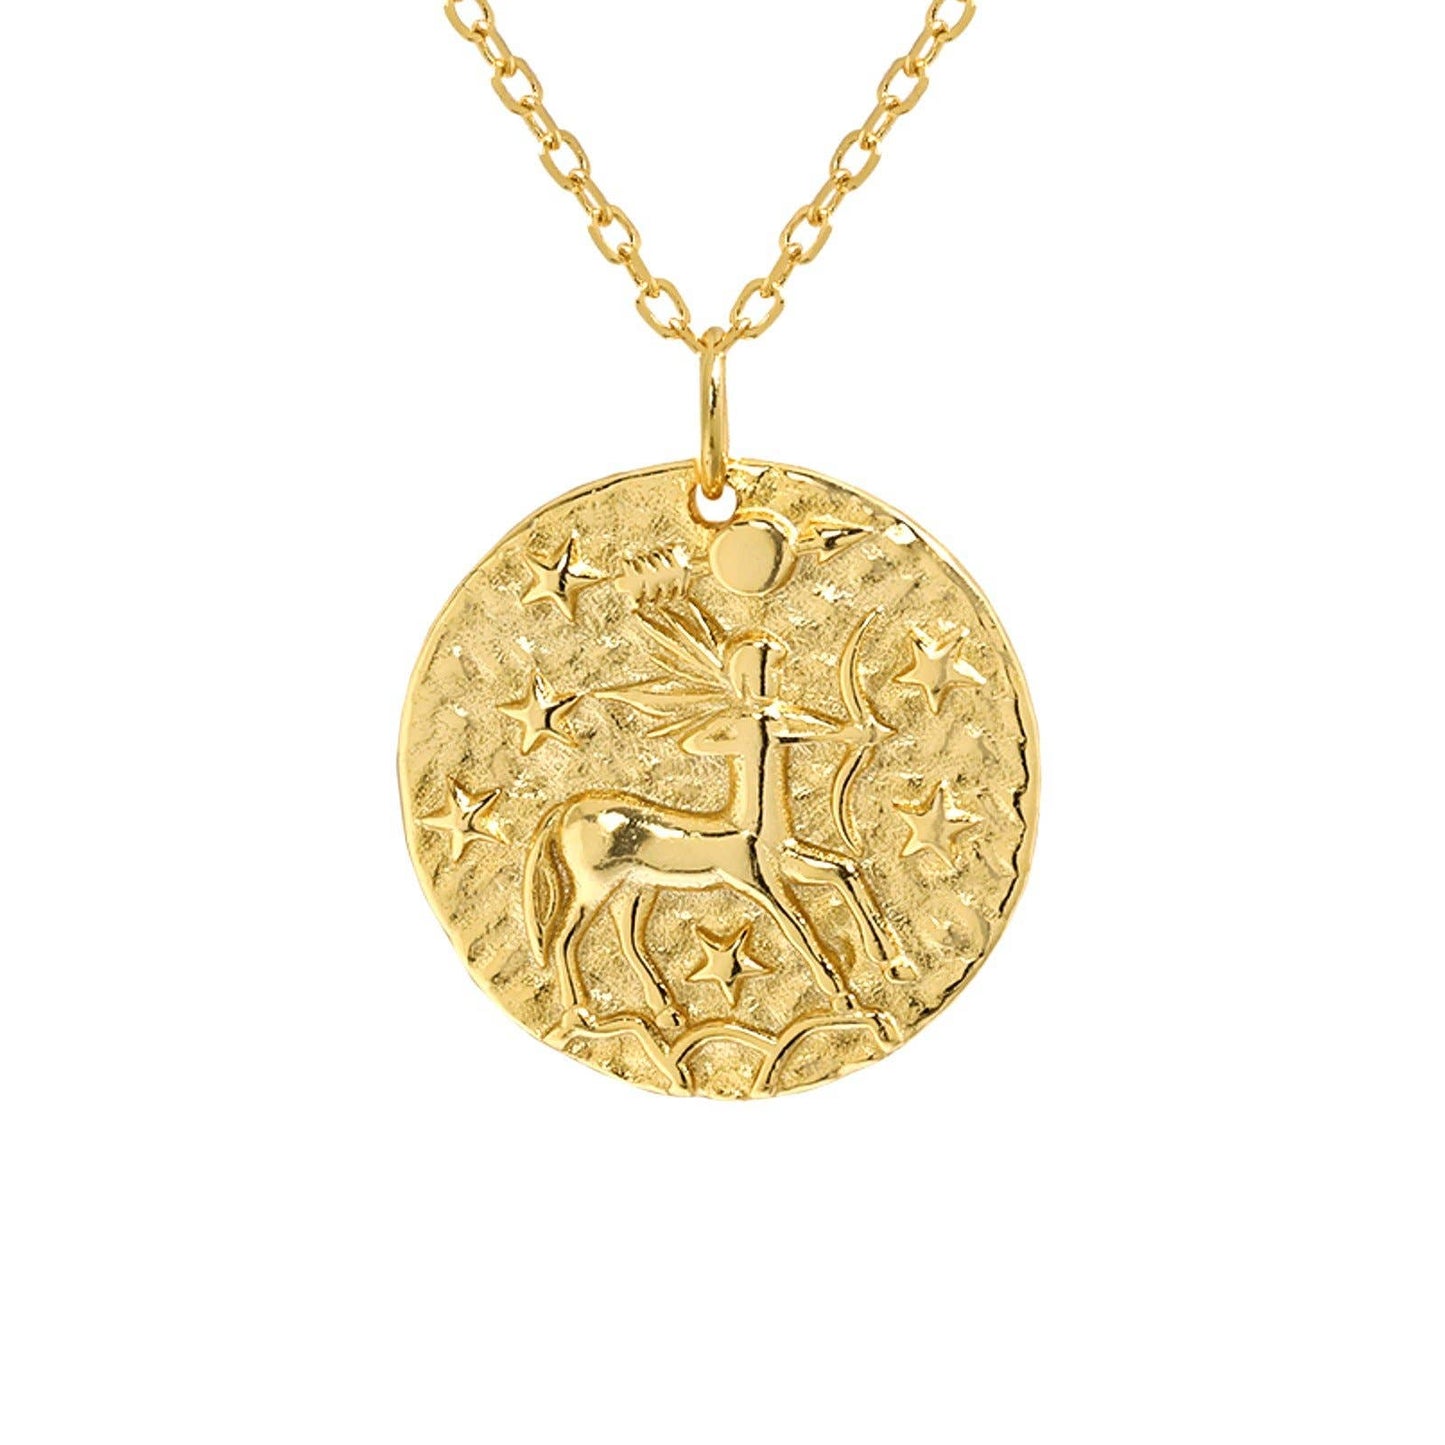 Sagittarius Zodiac Necklace 18K Gold over Sterling Silver